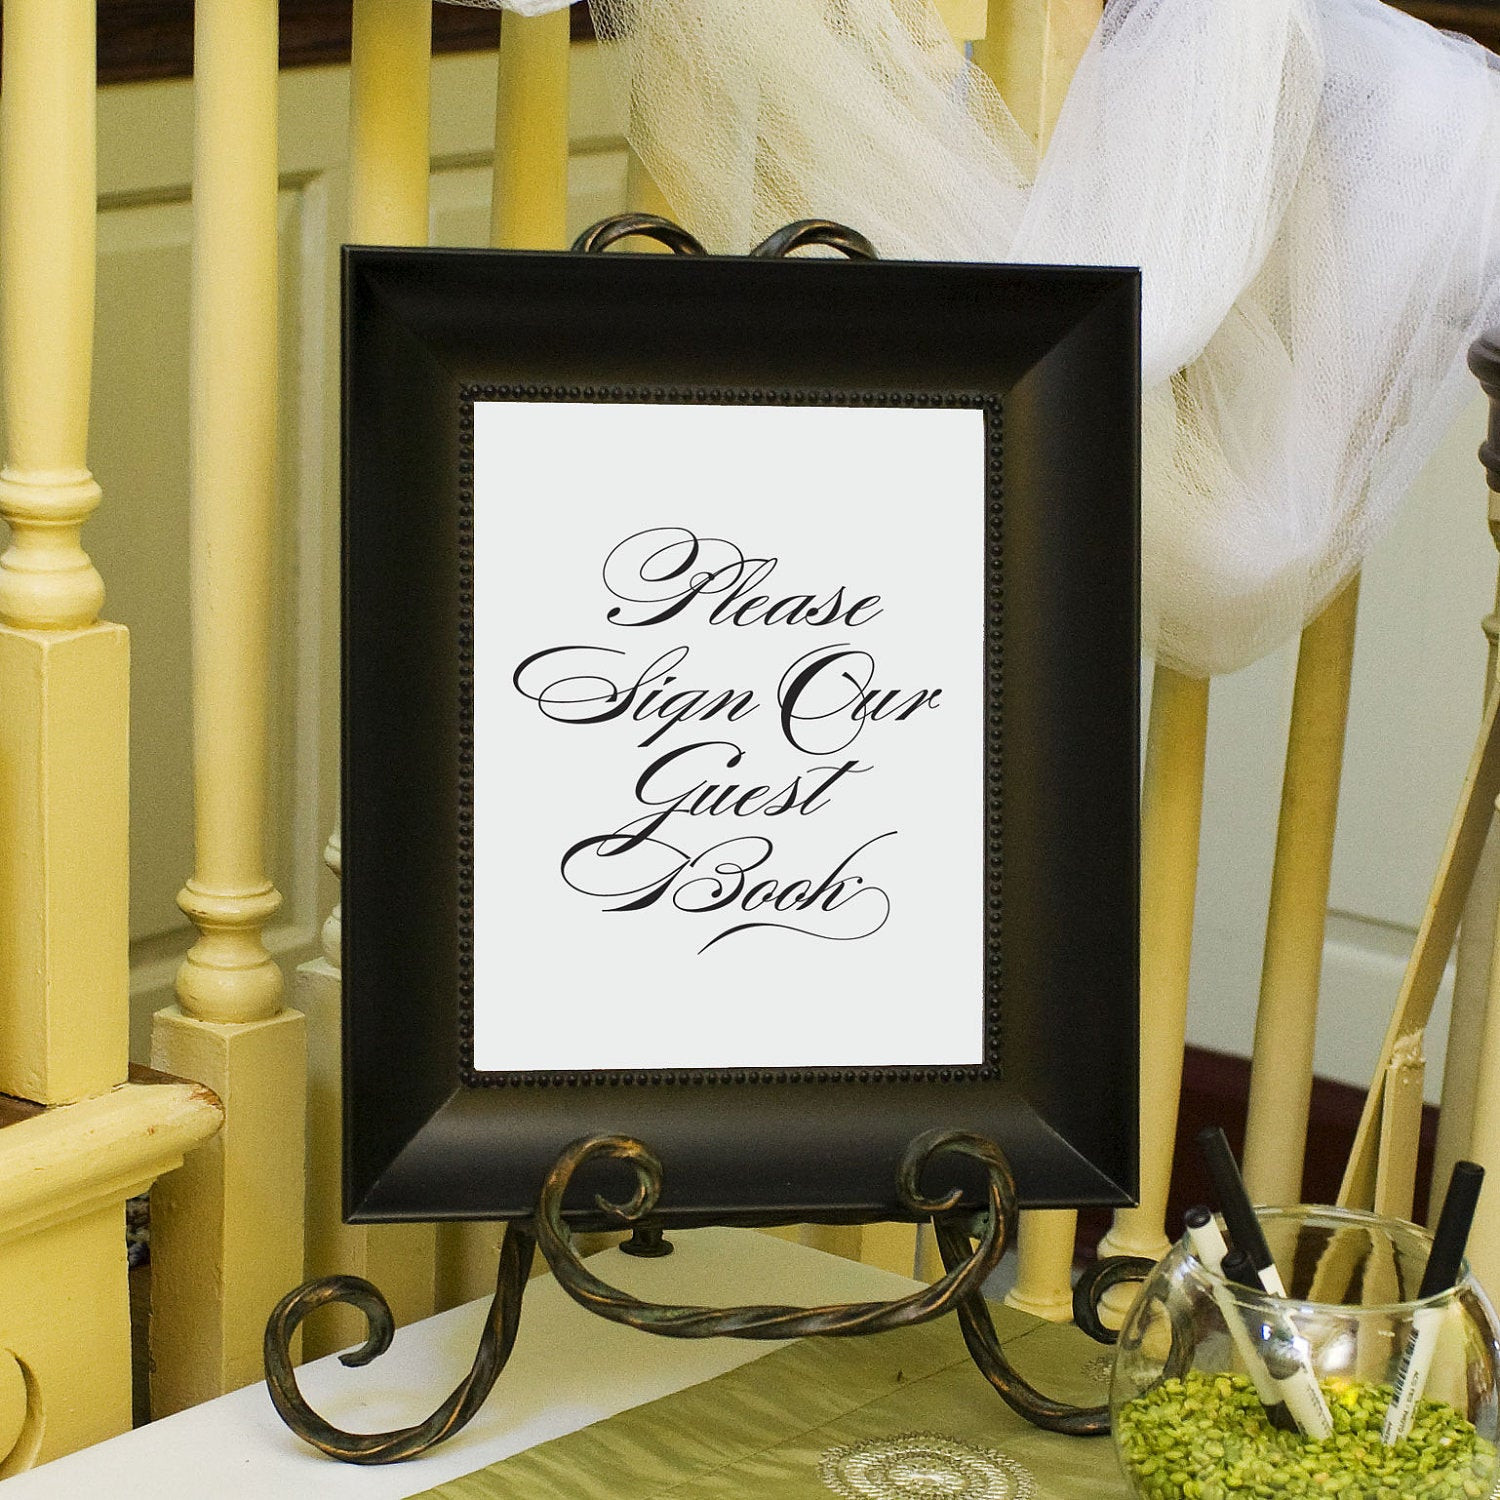 Wedding Guest Sign In Books
 Wedding Guest Book Sign Guestbook Sign by EdenWeddingStudio